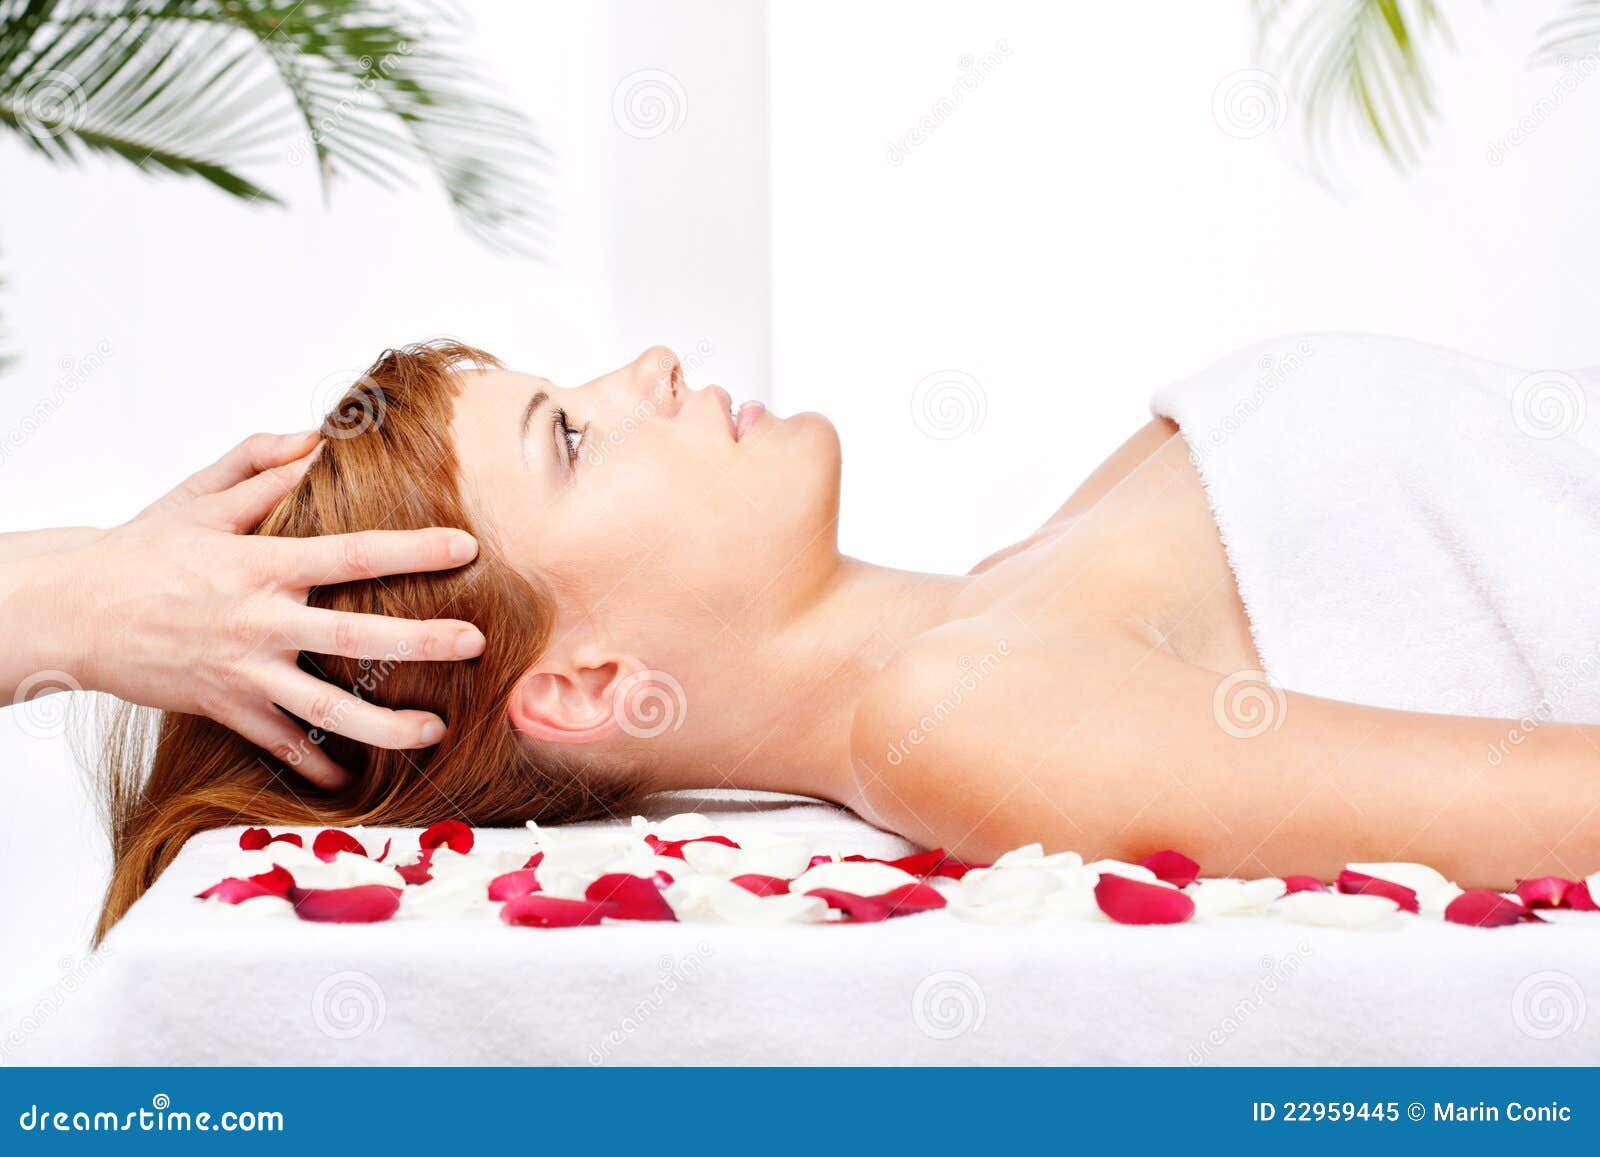 Woman On Head Massage Treatment In Salon Stock Image Image Of Care